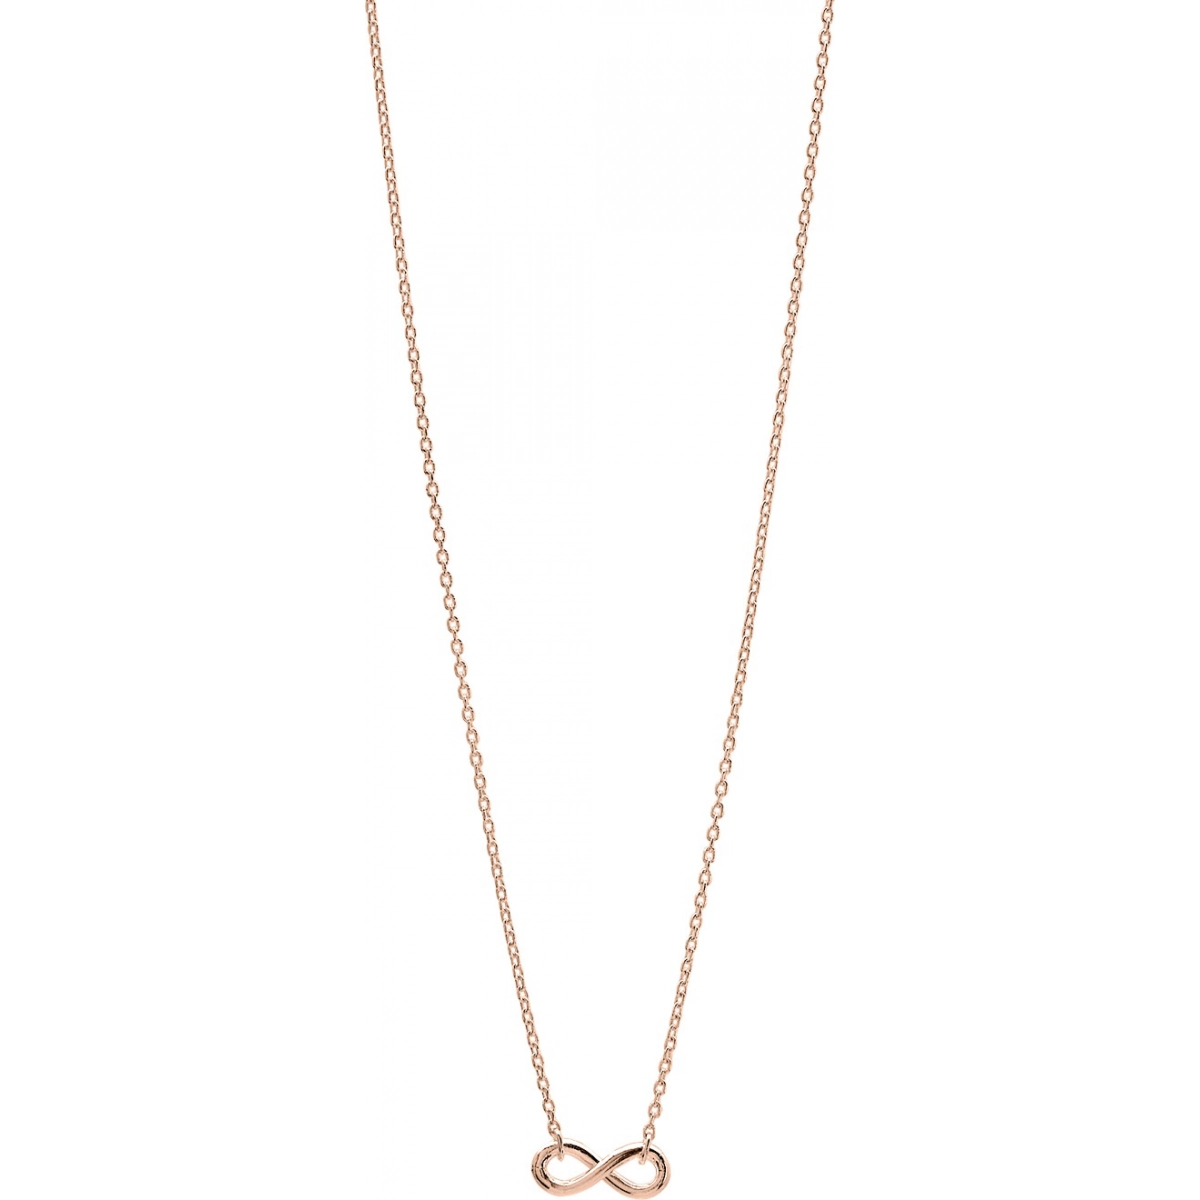 Collier plaqué or rose - Taille: 42  Lua Blanca  132114.R.42